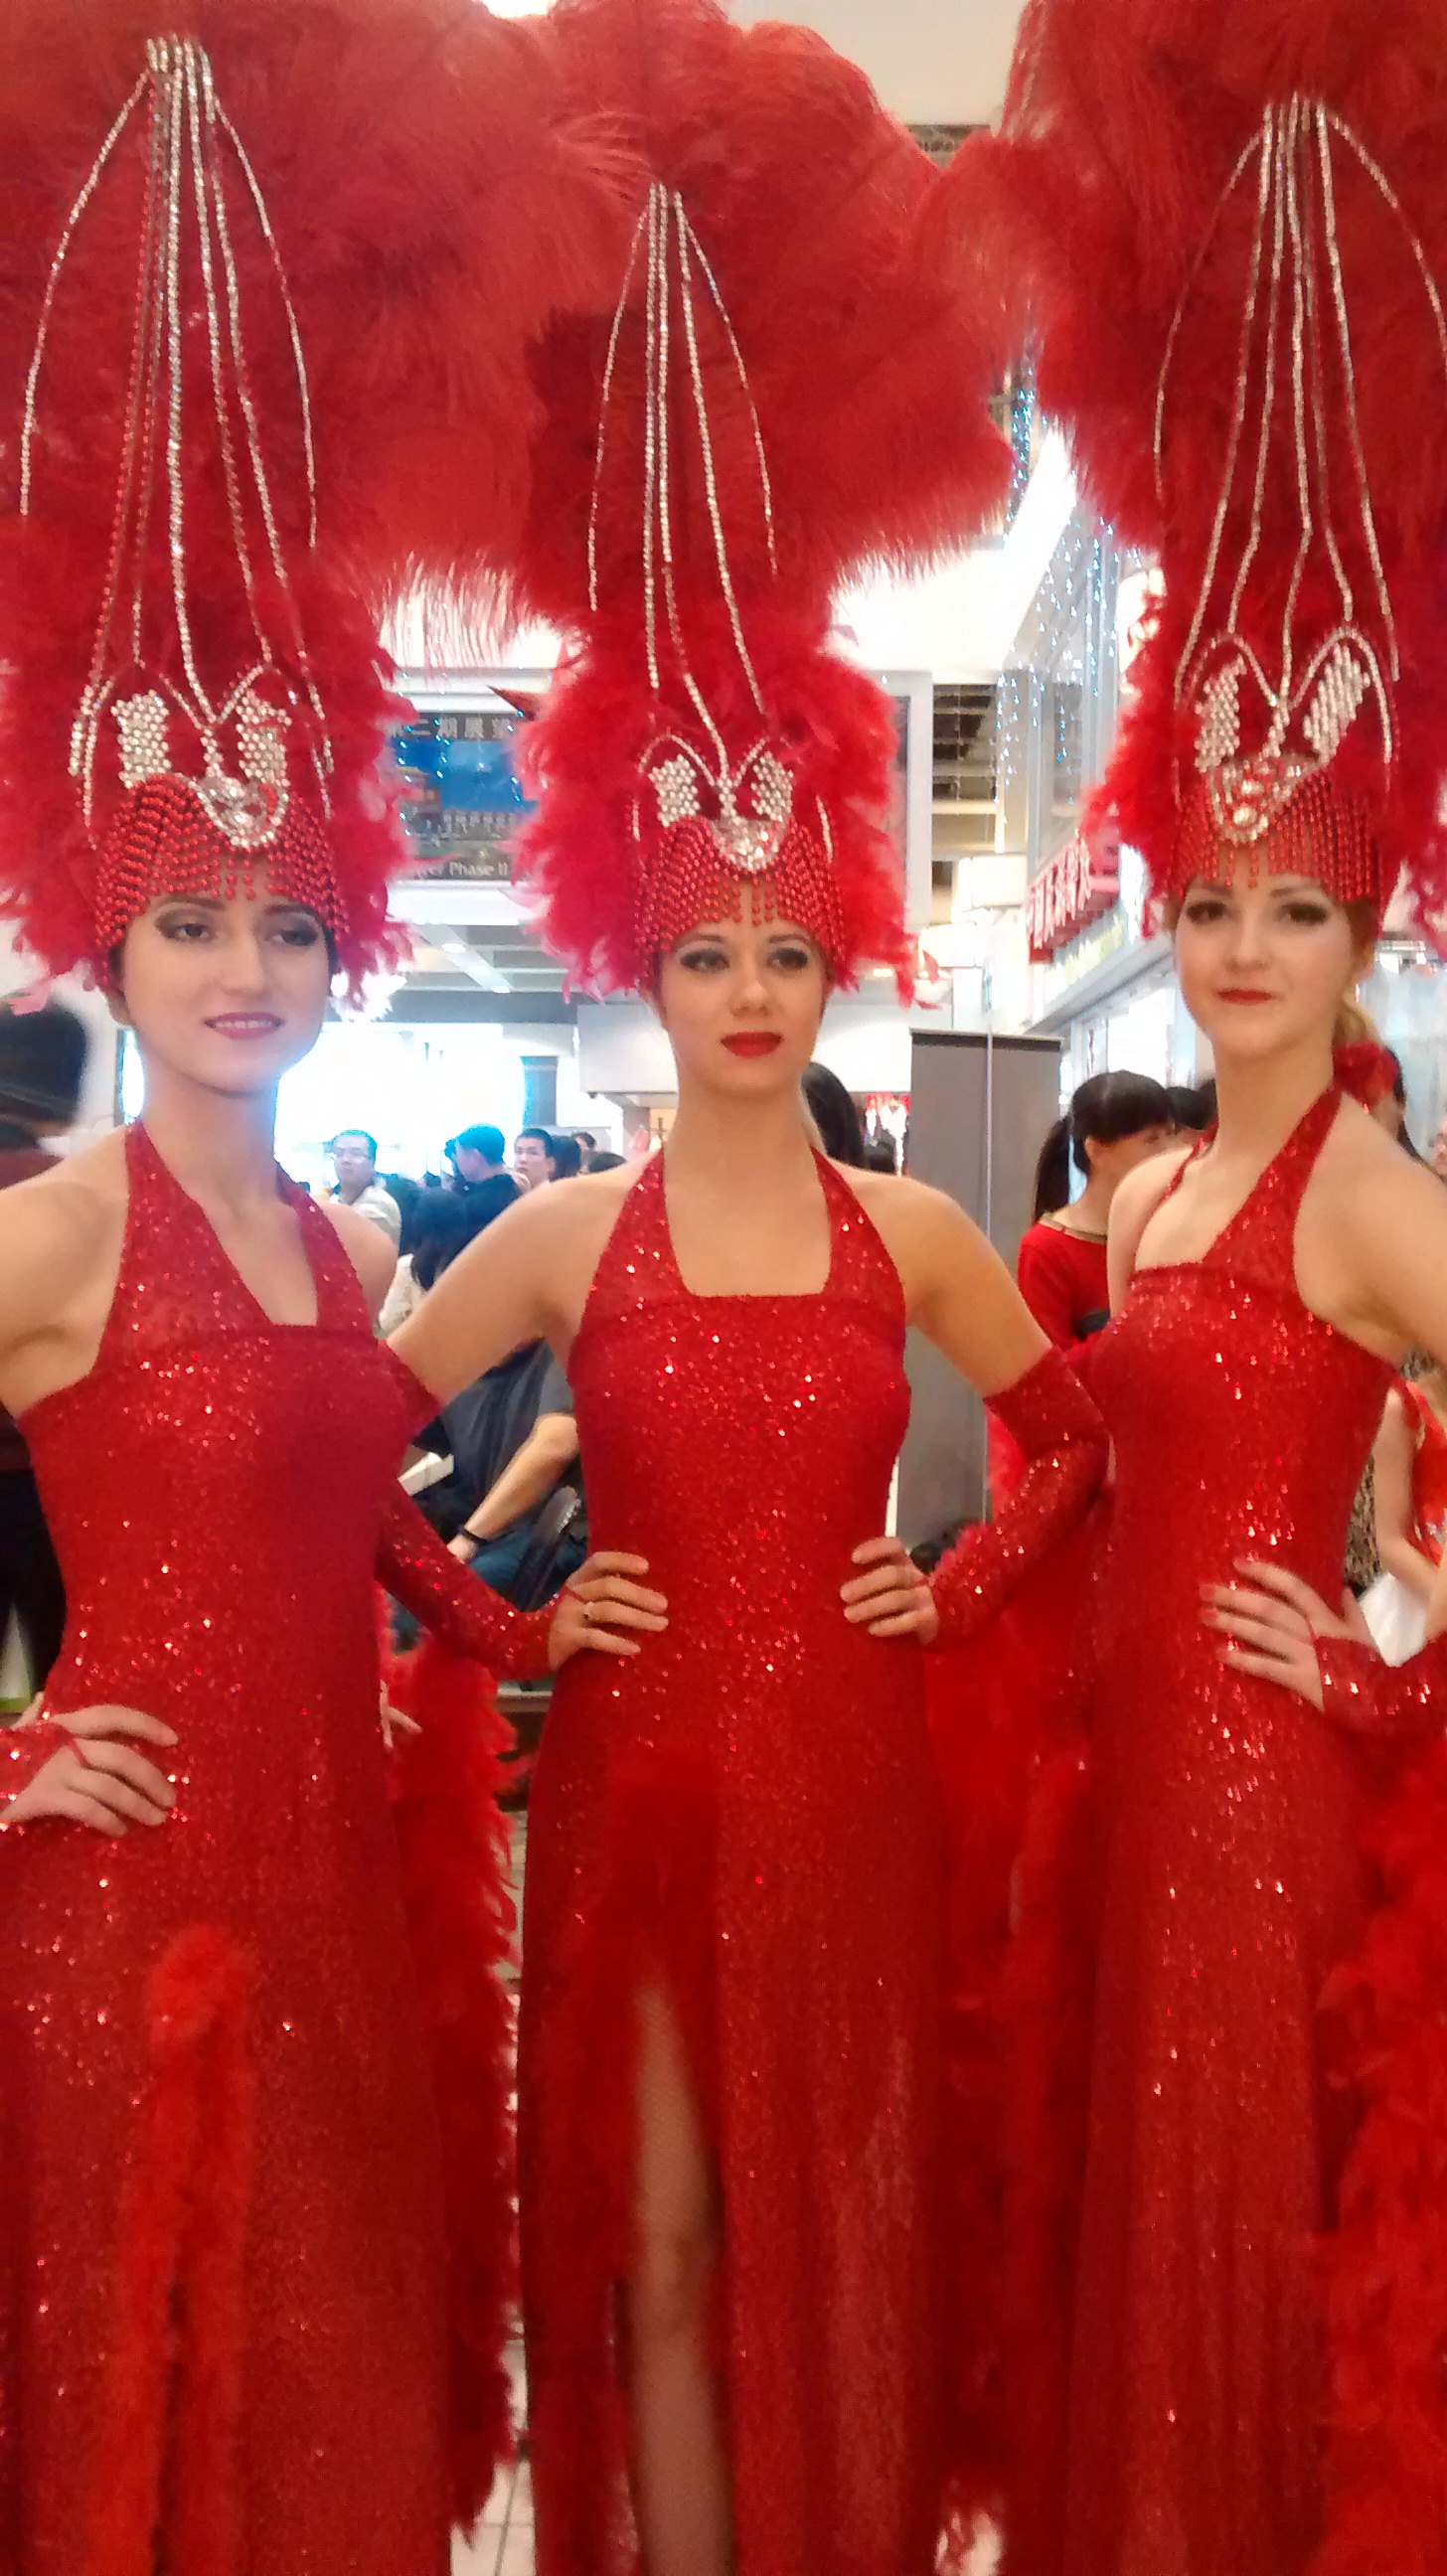 LADIES IN RED